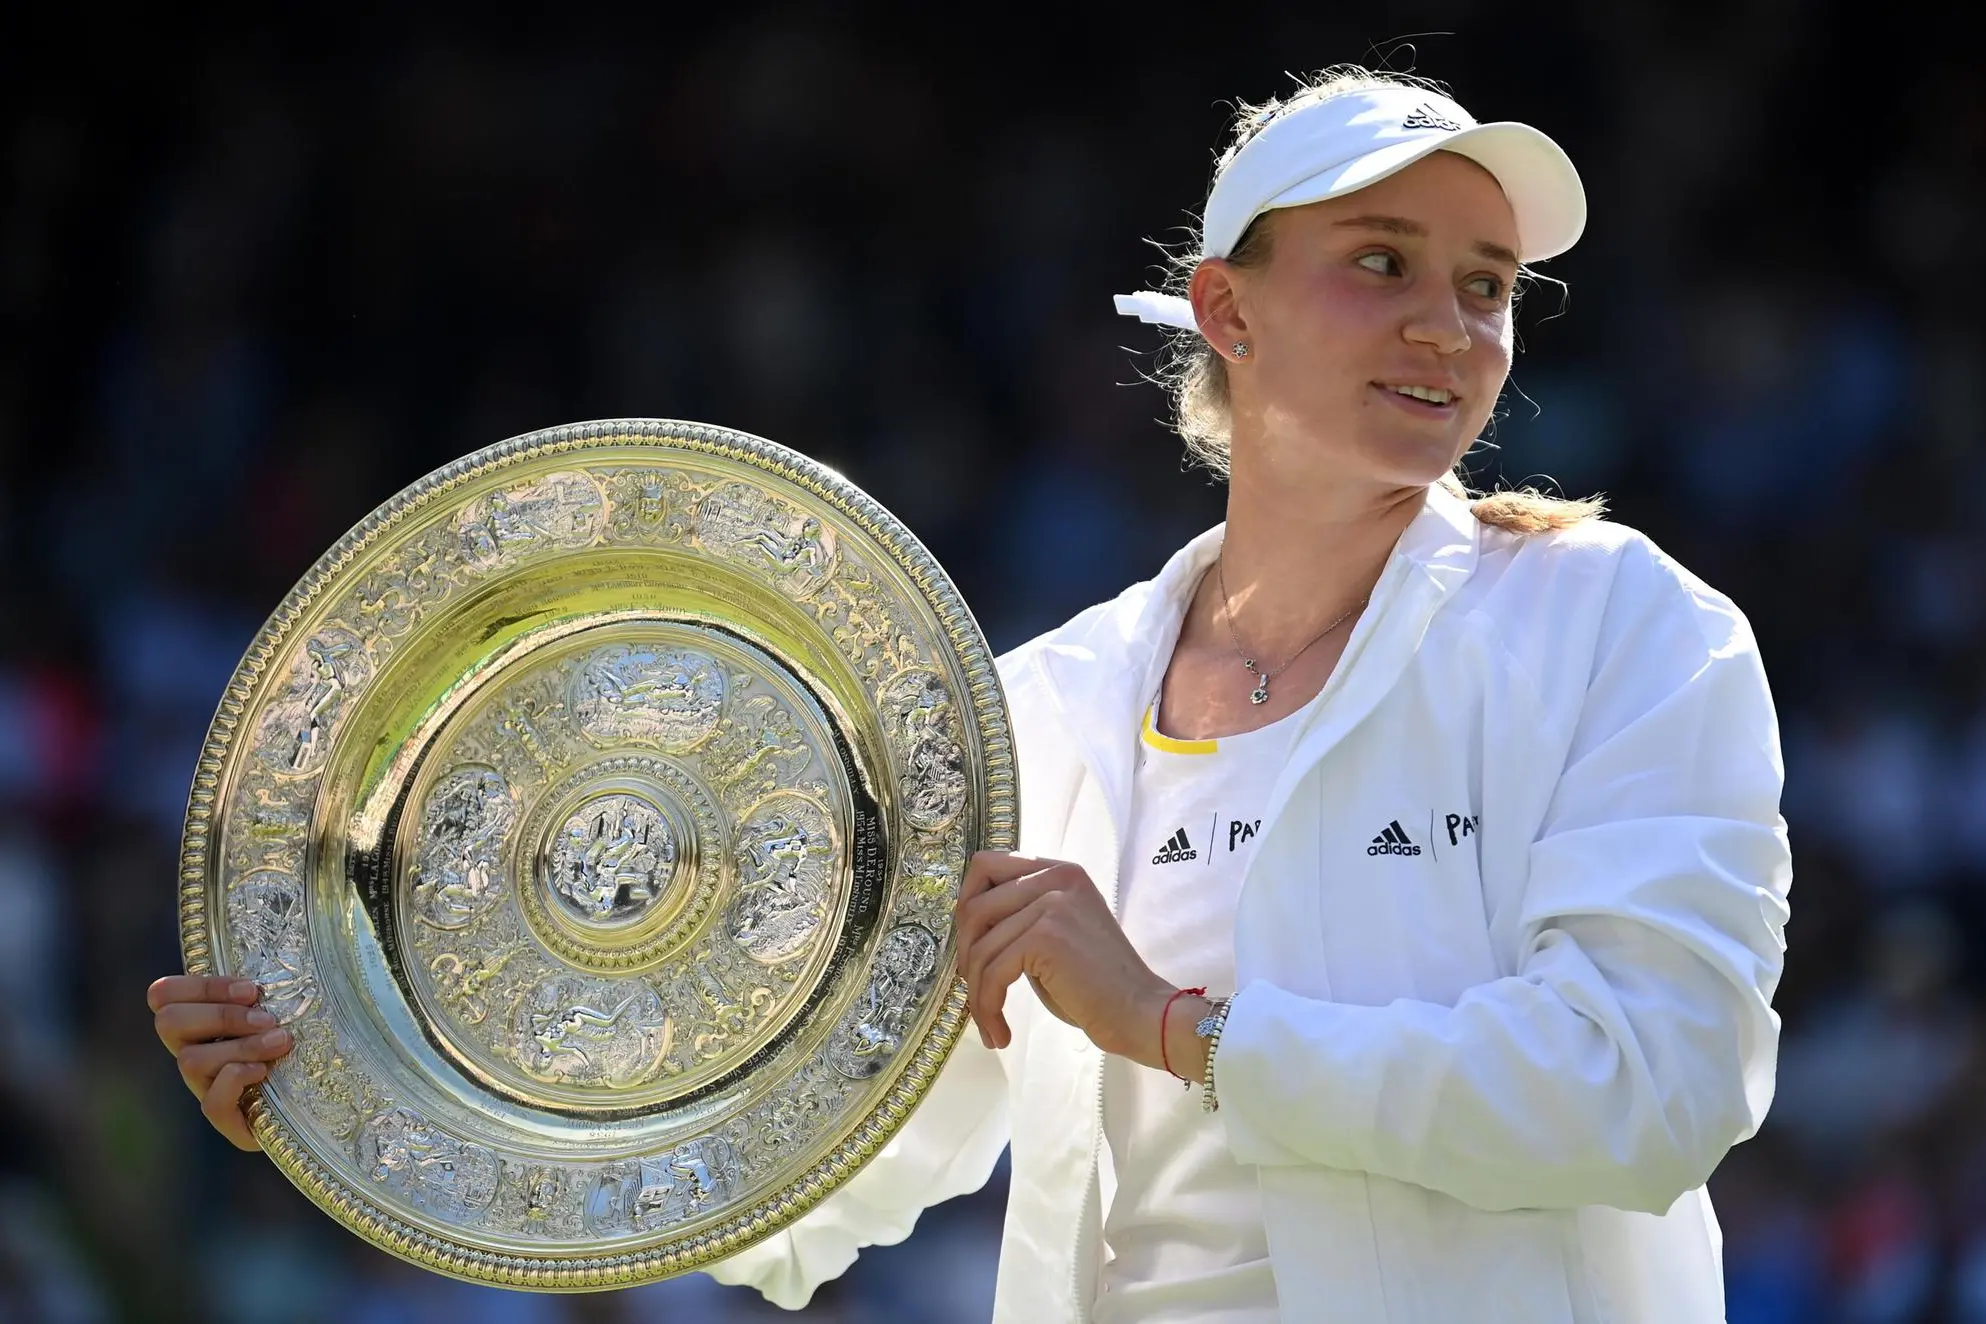 epa10061856 Elena Rybakina of Kazakhstan poses with the trophy after winning the women's final match against Ons Jabeur of Tunisia at the Wimbledon Championships, in Wimbledon, Britain, 09 July 2022. EPA/NEIL HALL EDITORIAL USE ONLY